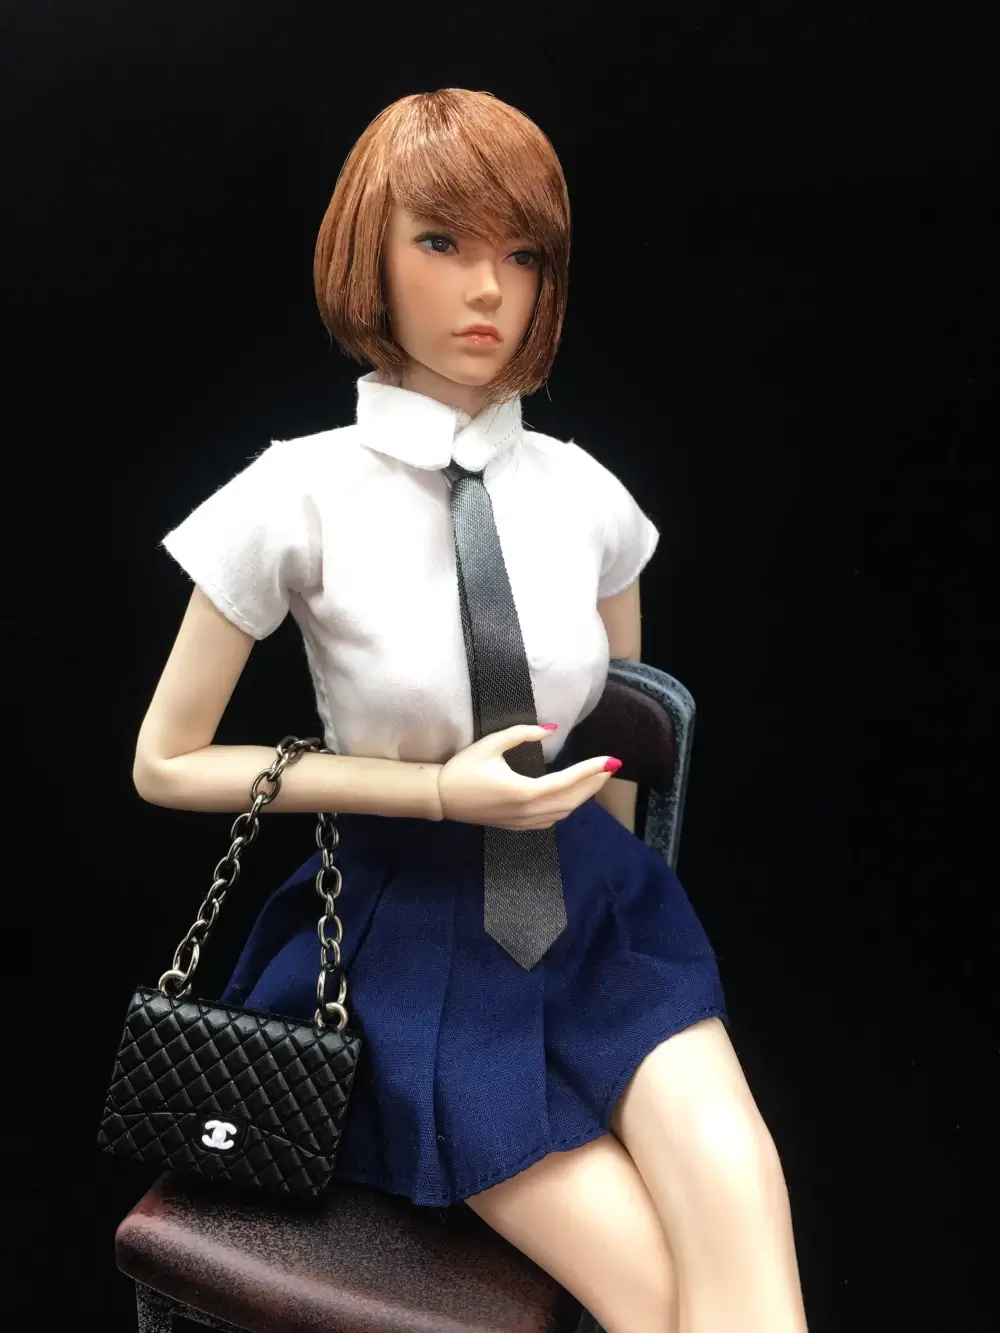 1/6 Scale Clothes, Fab Figures, Create A Custom Action Figure Of Your Own